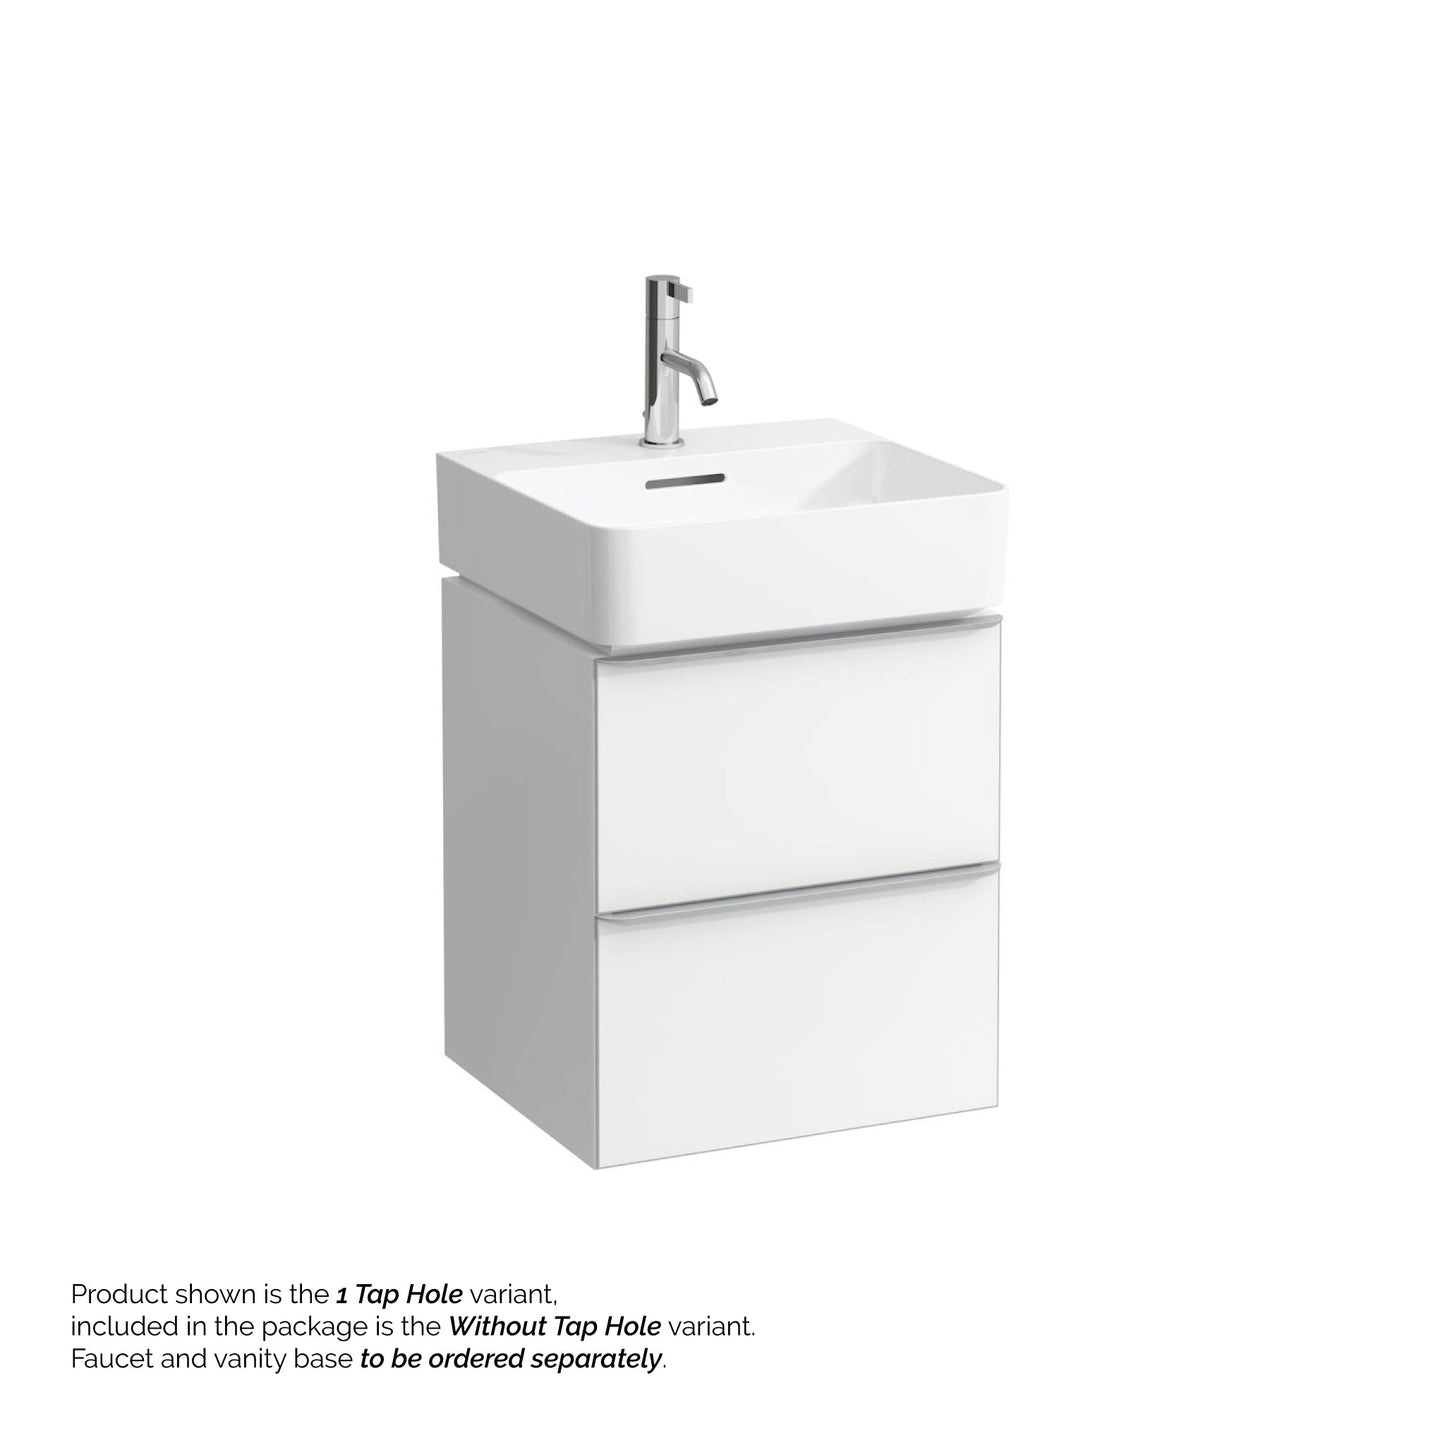 Laufen Val 18" x 17" Rectangular White Ceramic Wall-Mounted Bathroom Sink Without Faucet Hole